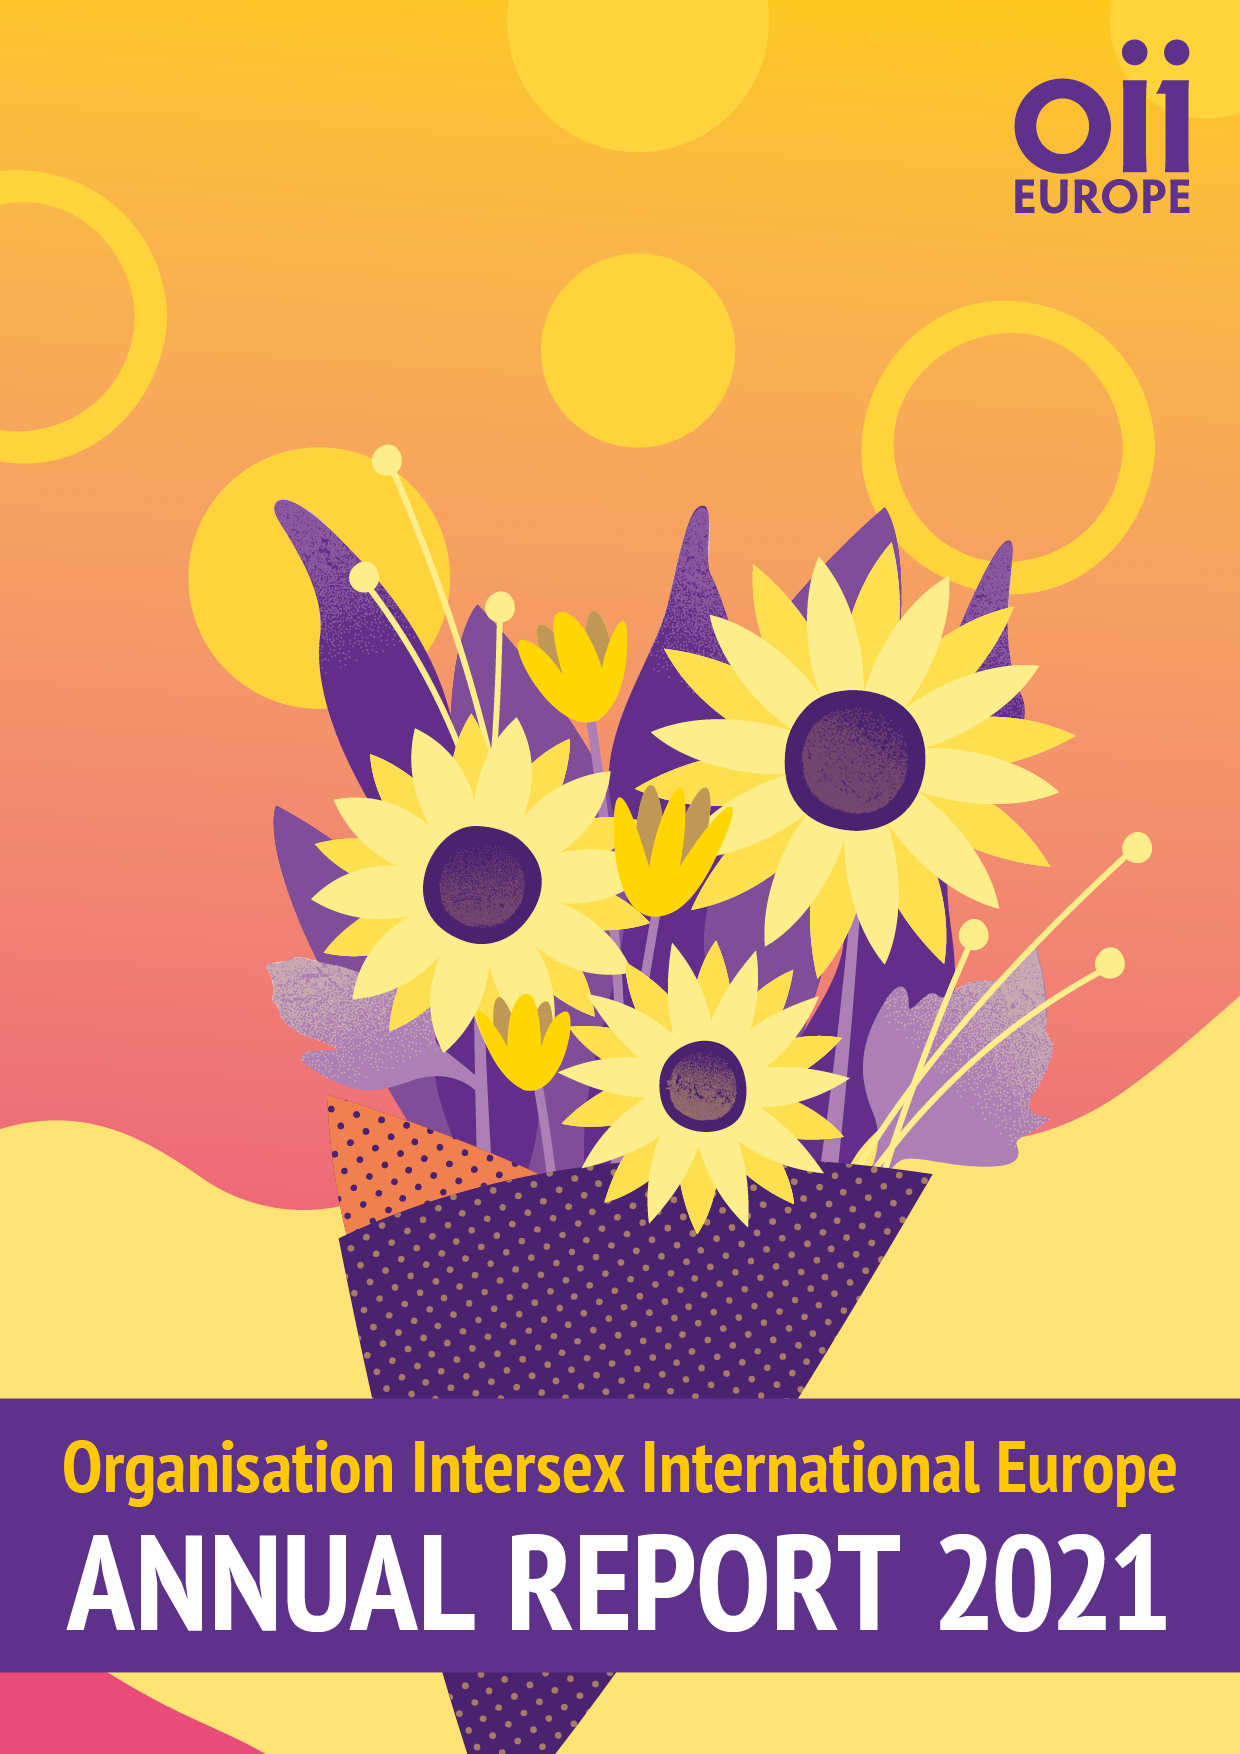 OII Europe Annual Report 2021